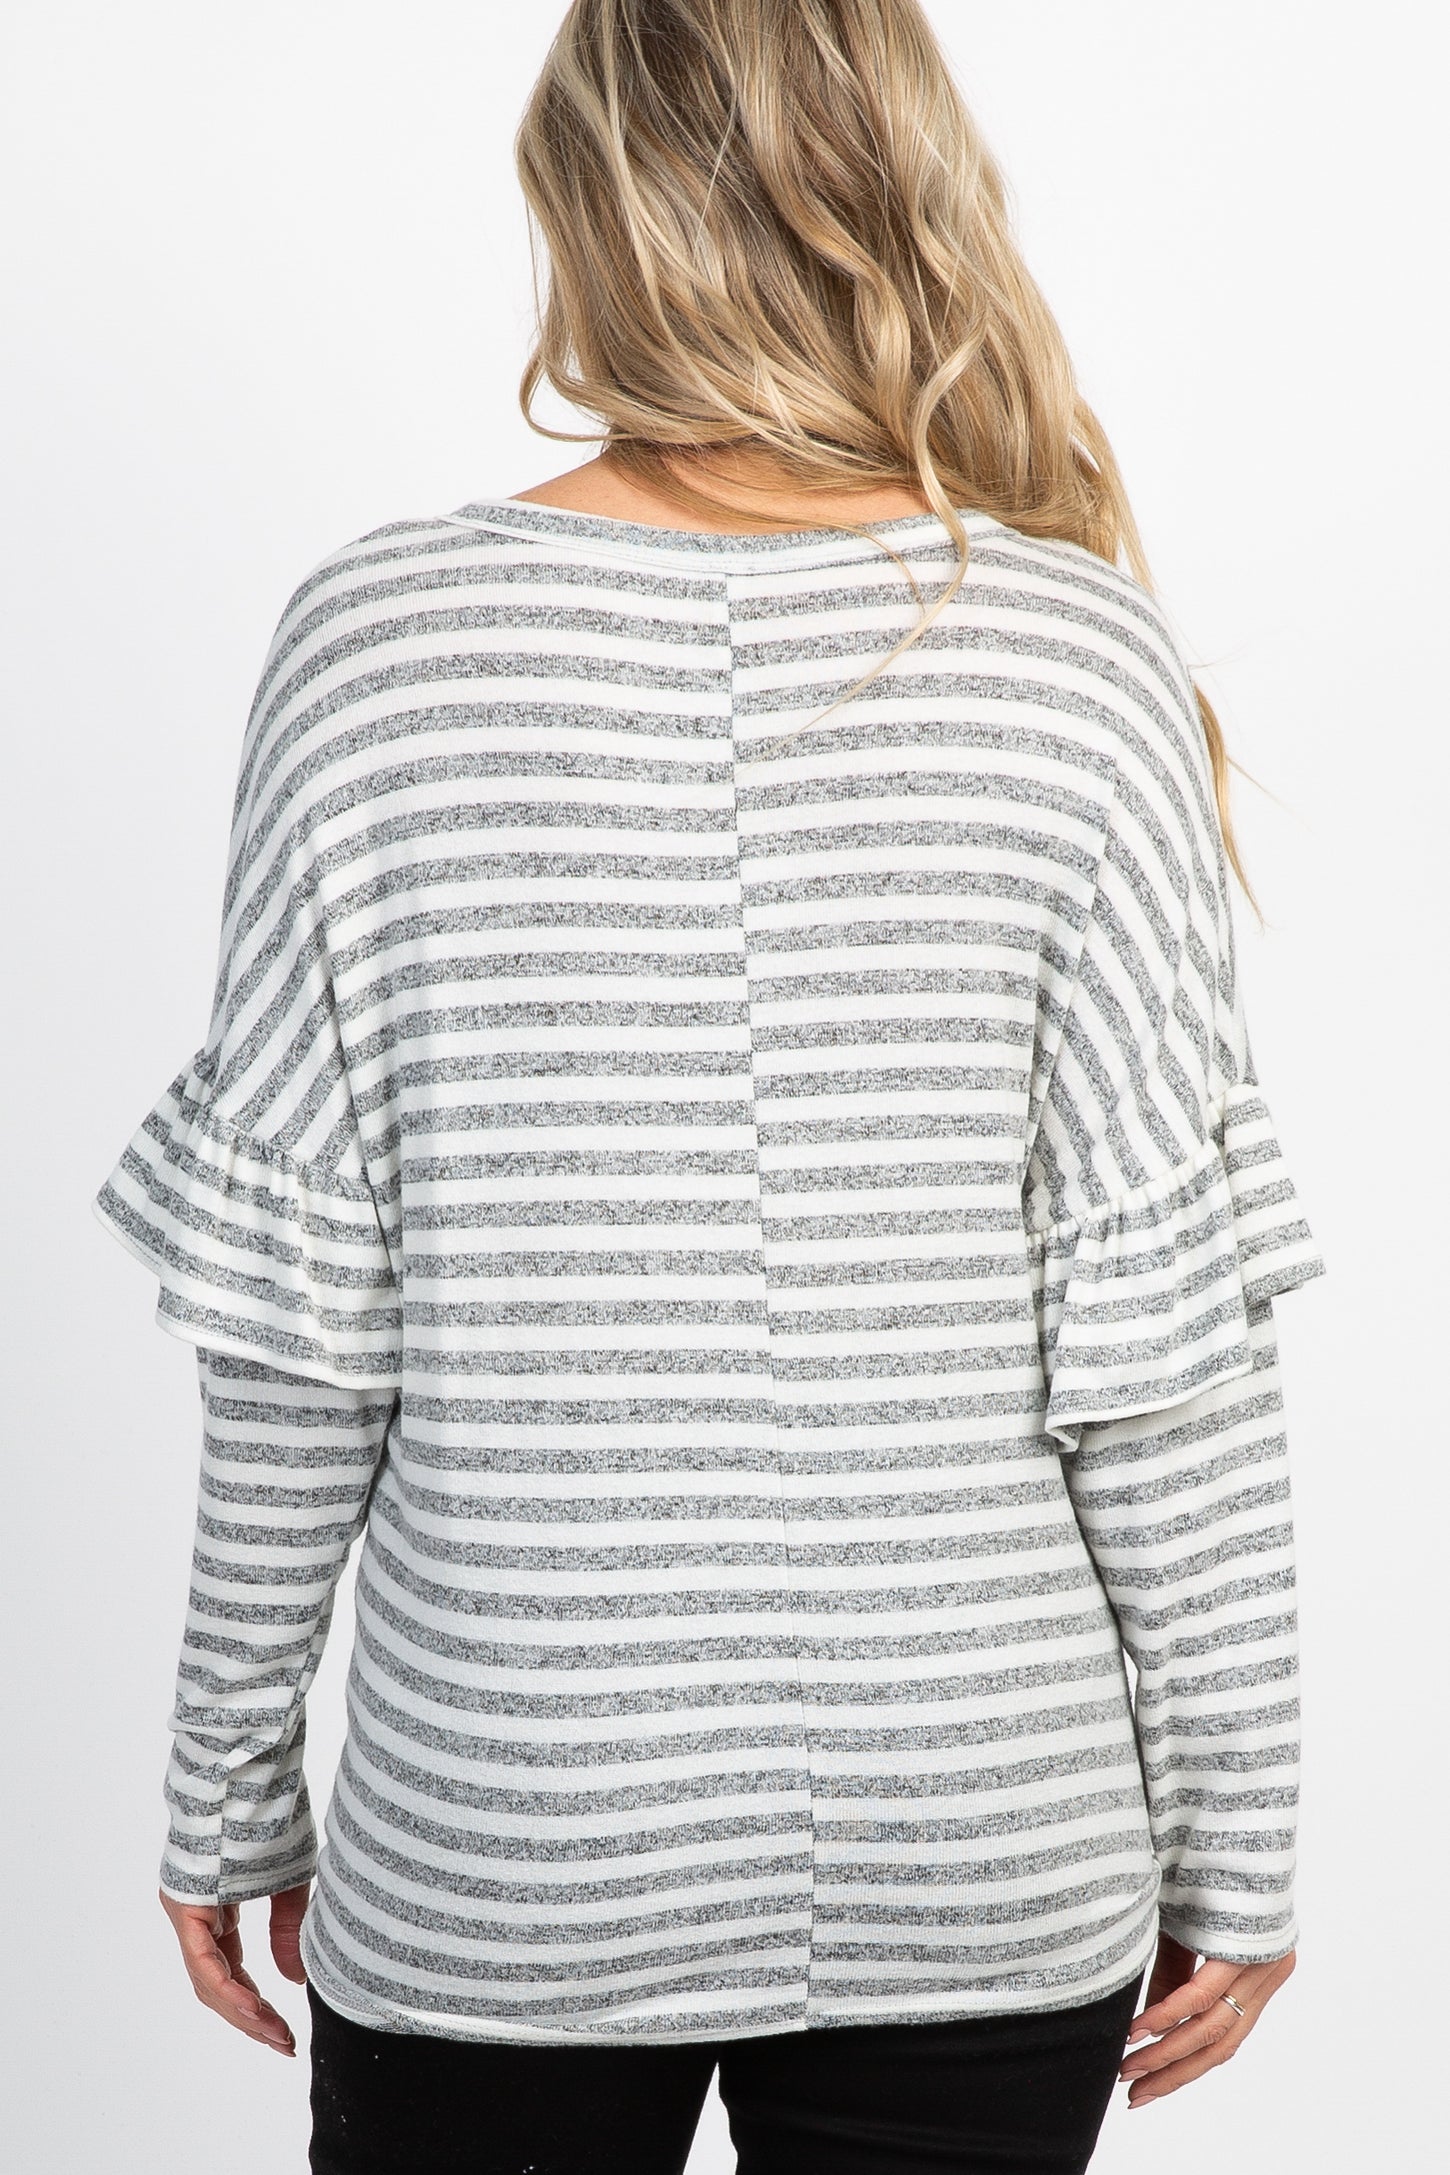 Heather Grey Striped Ruffle Sleeve Button Tie Front Maternity Top